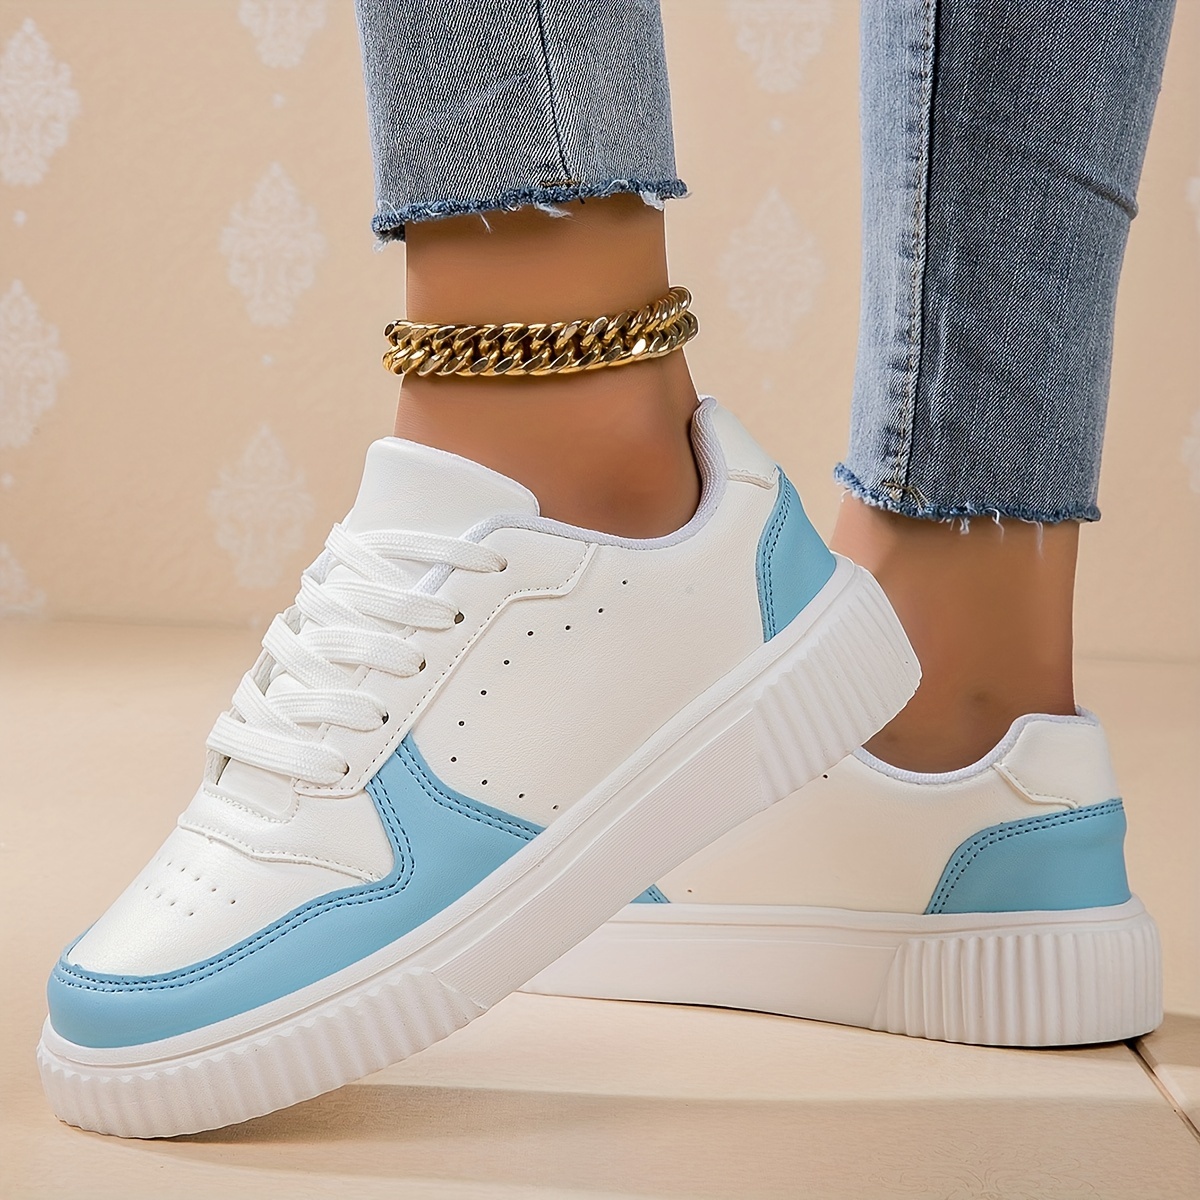 womens solid color sneakers casual lightweight low top skate shoes comfortable white lace up shoes details 8